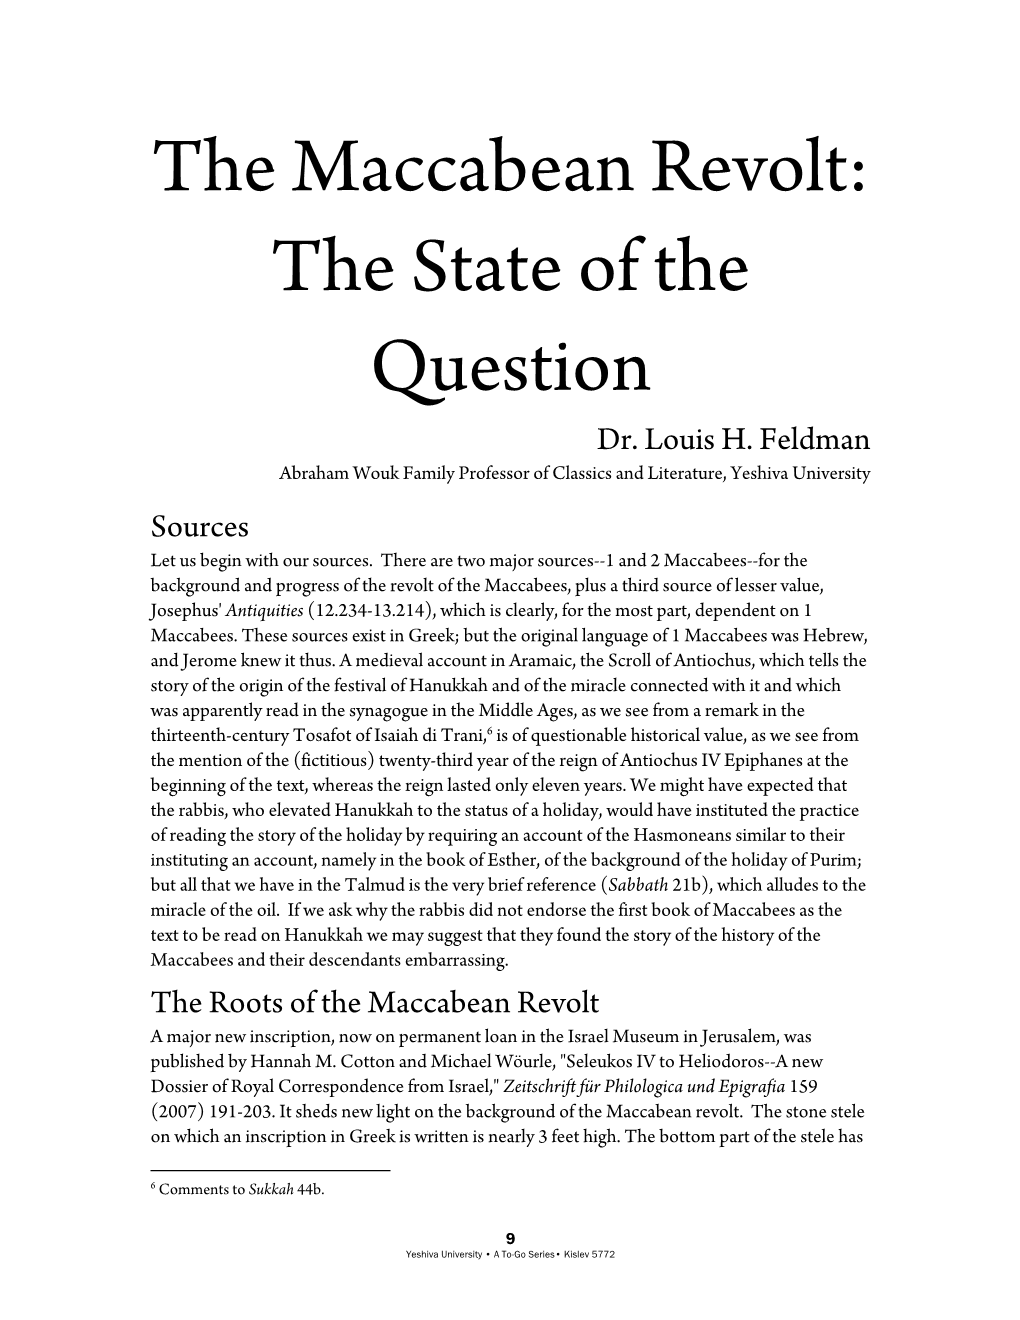 The Maccabean Revolt: the State of the Question Dr